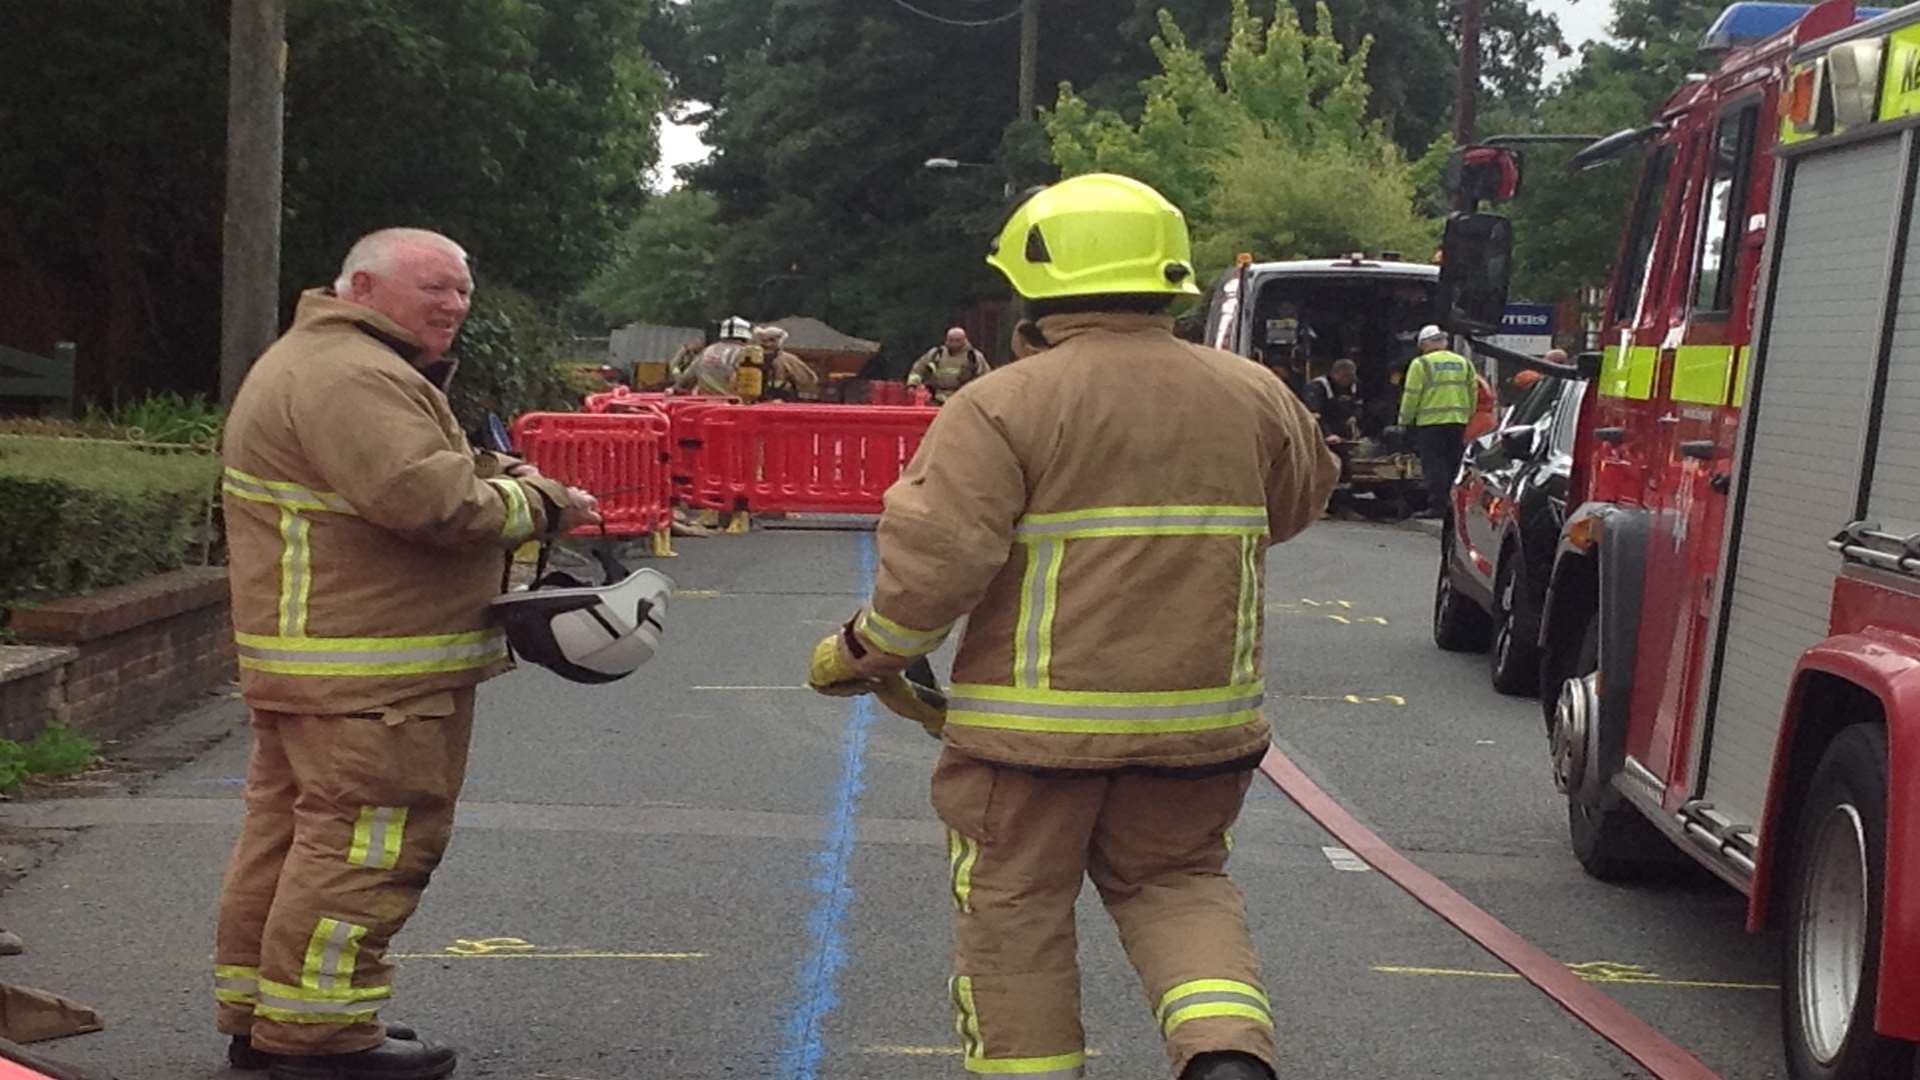 Homes have been evacuated in Lympne after a gas leak